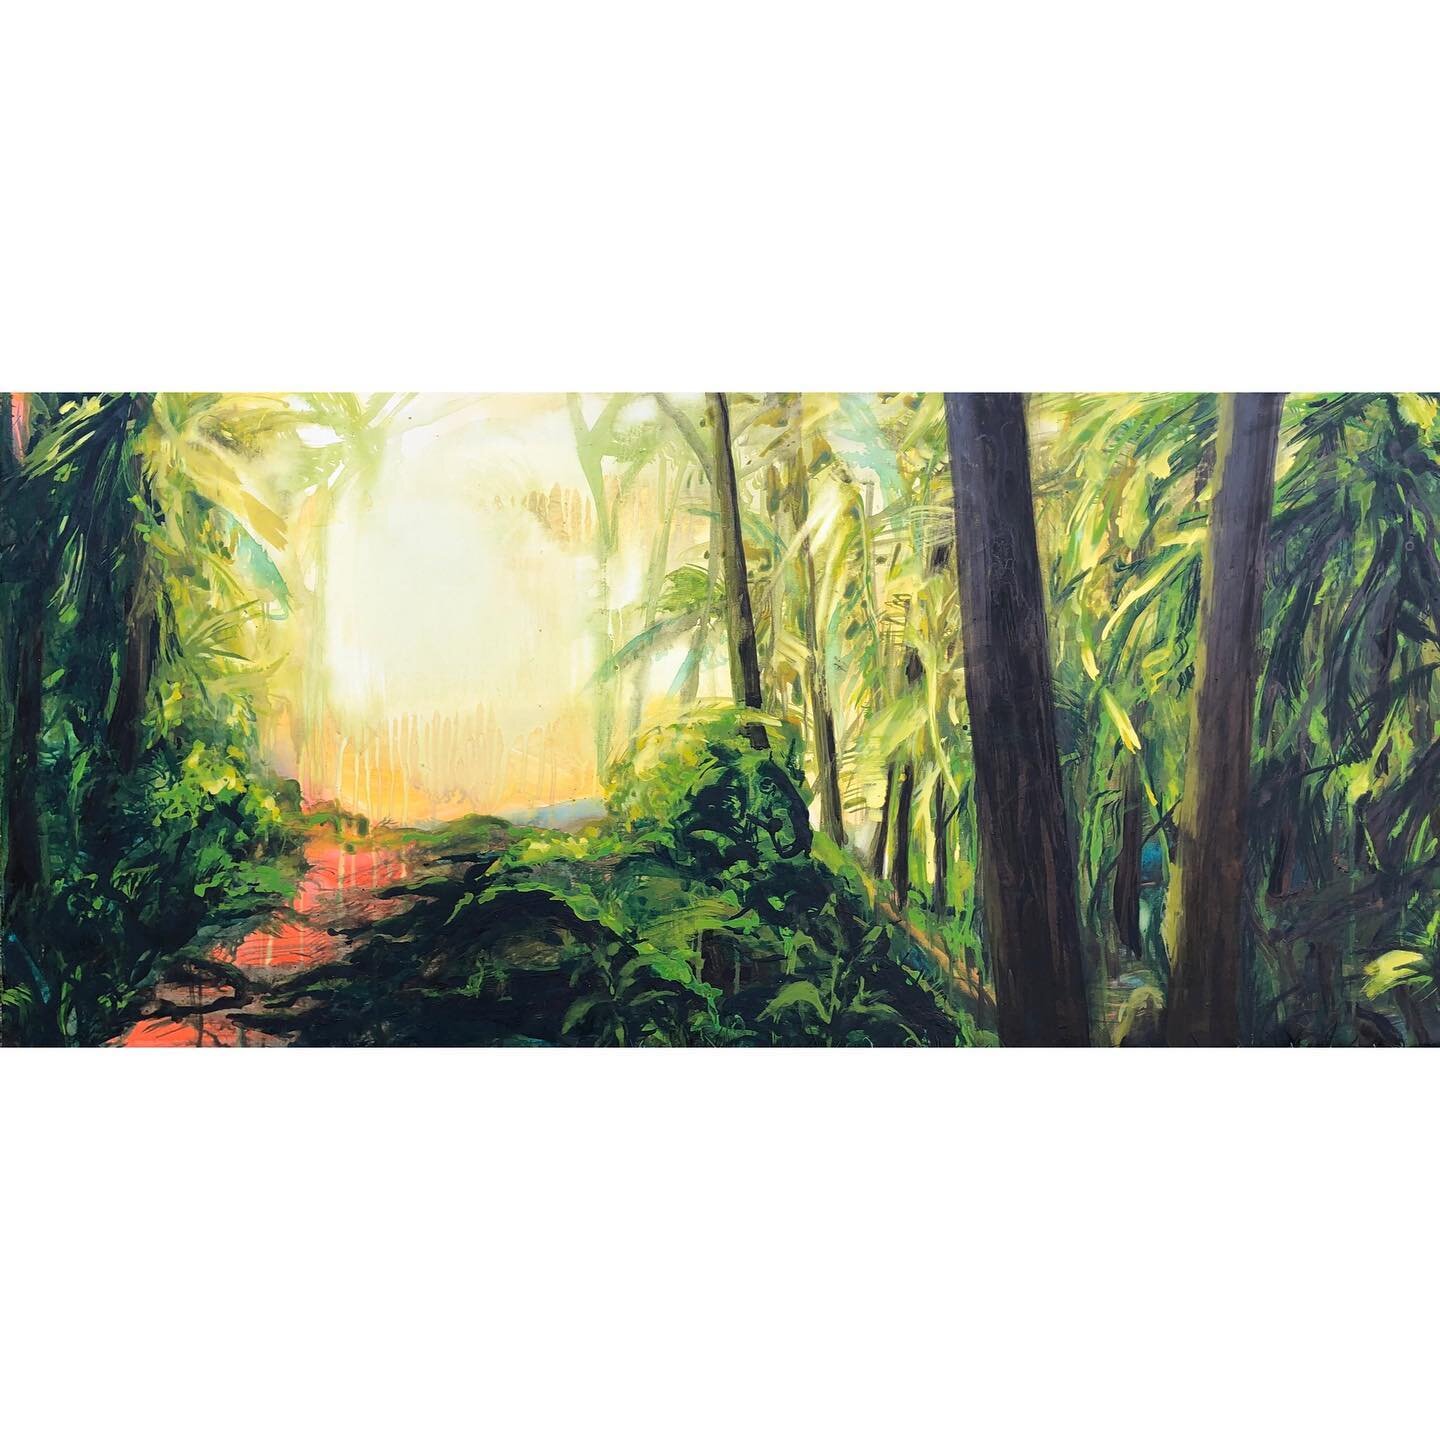 &acute;In every walk with nature, one receives far more than they seek&acute;&hellip; John Muir

Jungle Path, 70 x 150 cm, oil on canvas. Sold.

#contemporaryart #oilpainting #jungle #rainforest #natureart #womenartists #interiordesign #cobrah2oil #g